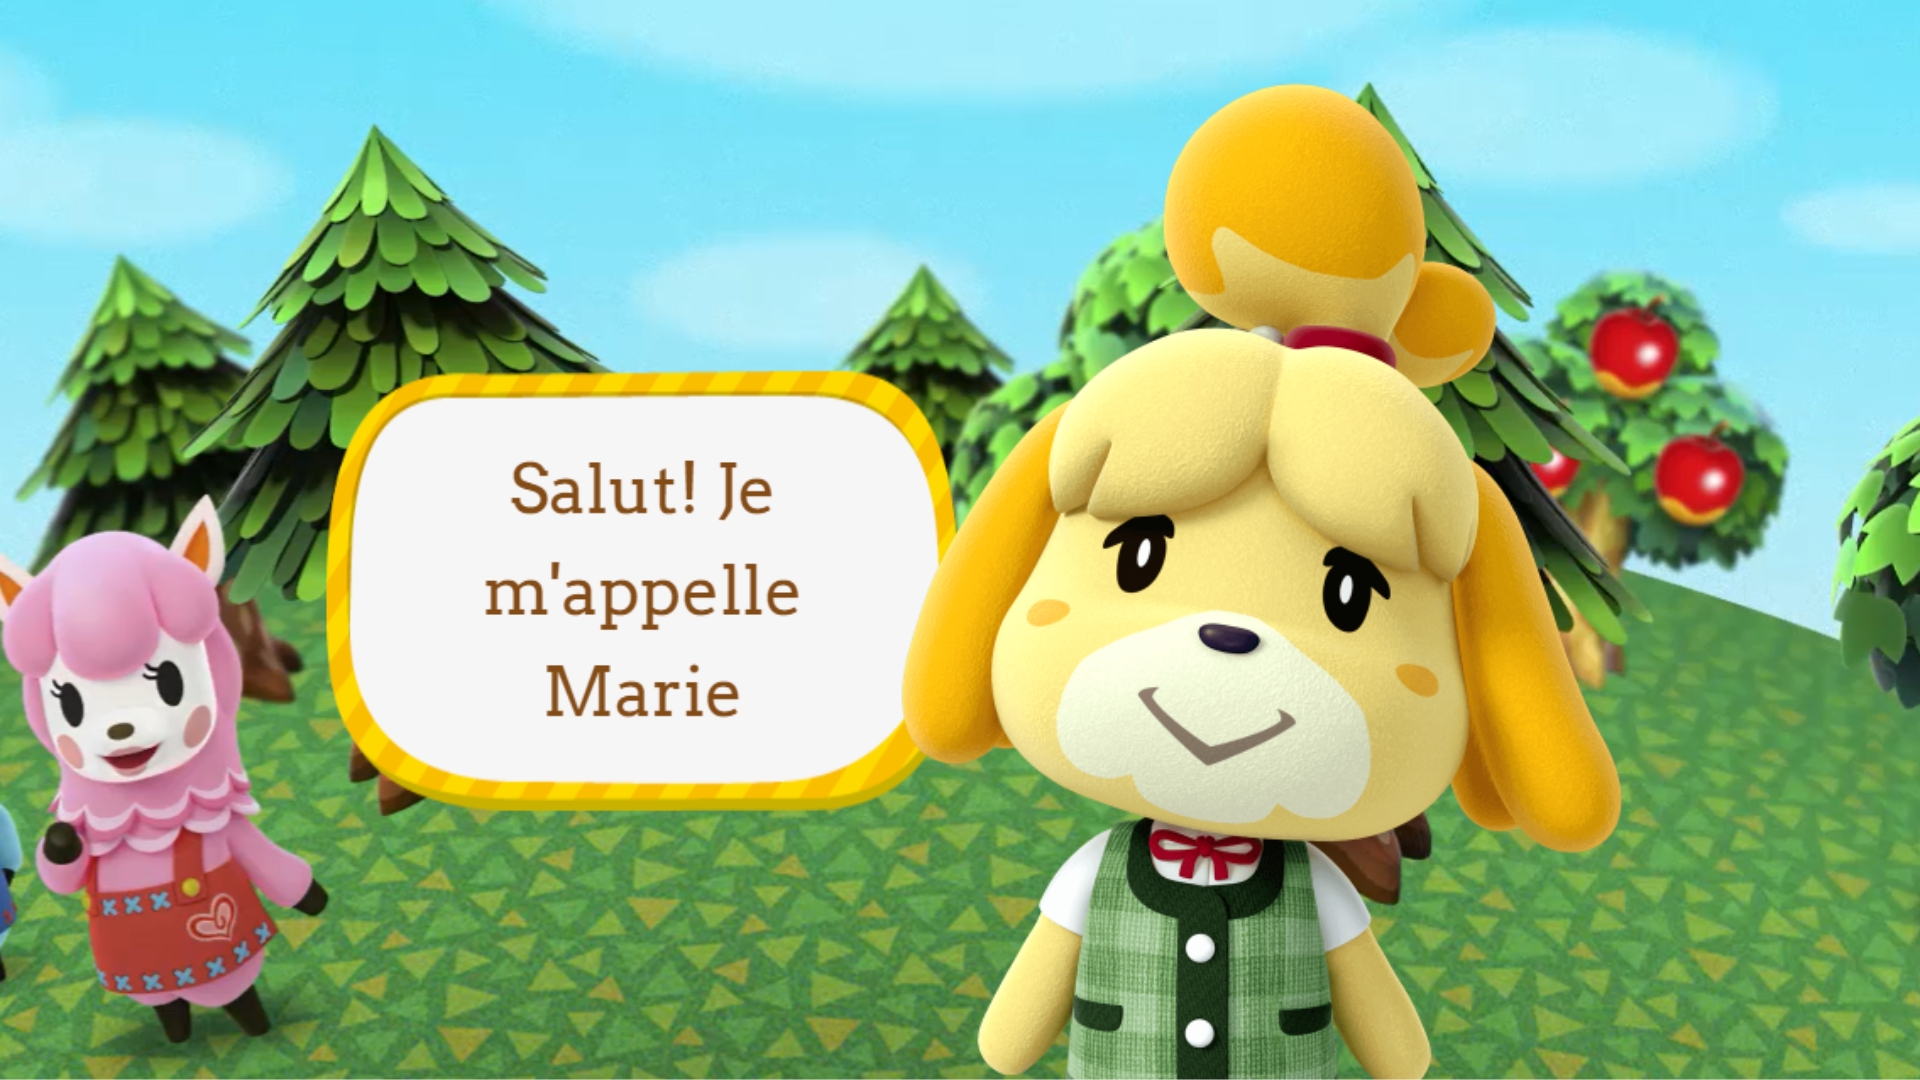 Why is she called Isabelle from Nintendo Marie in France?